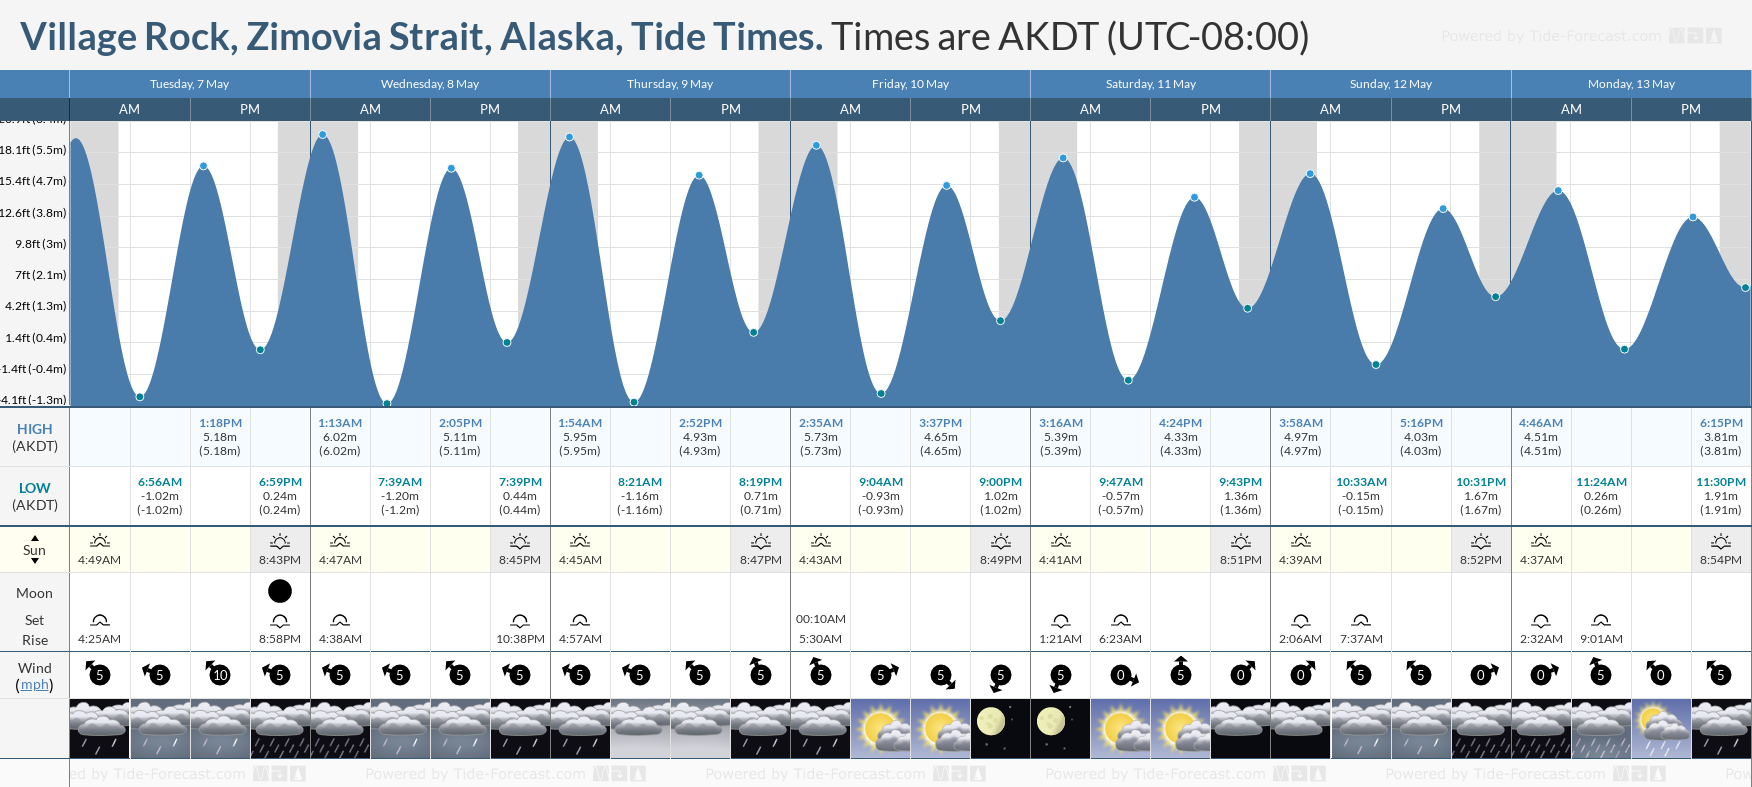 Village Rock, Zimovia Strait, Alaska Tide Chart including high and low tide tide times for the next 7 days